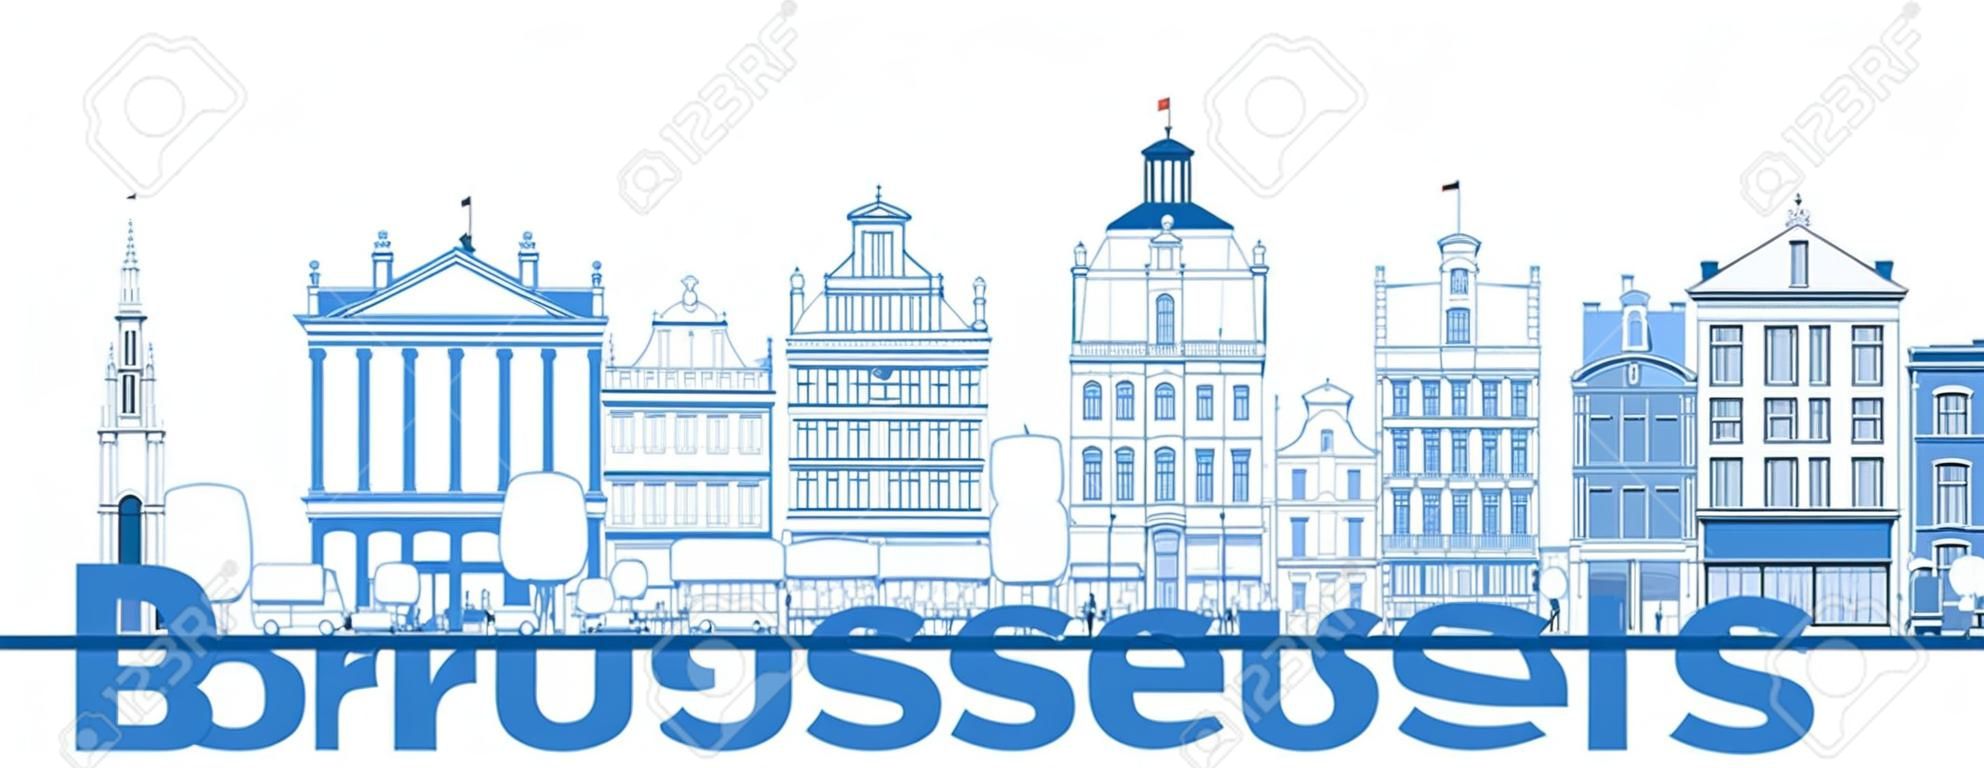 Outline Brussels Belgium City Skyline with Blue Buildings. Vector Illustration. Business Travel and Concept with Historic Architecture. Brussels Cityscape with Landmarks.